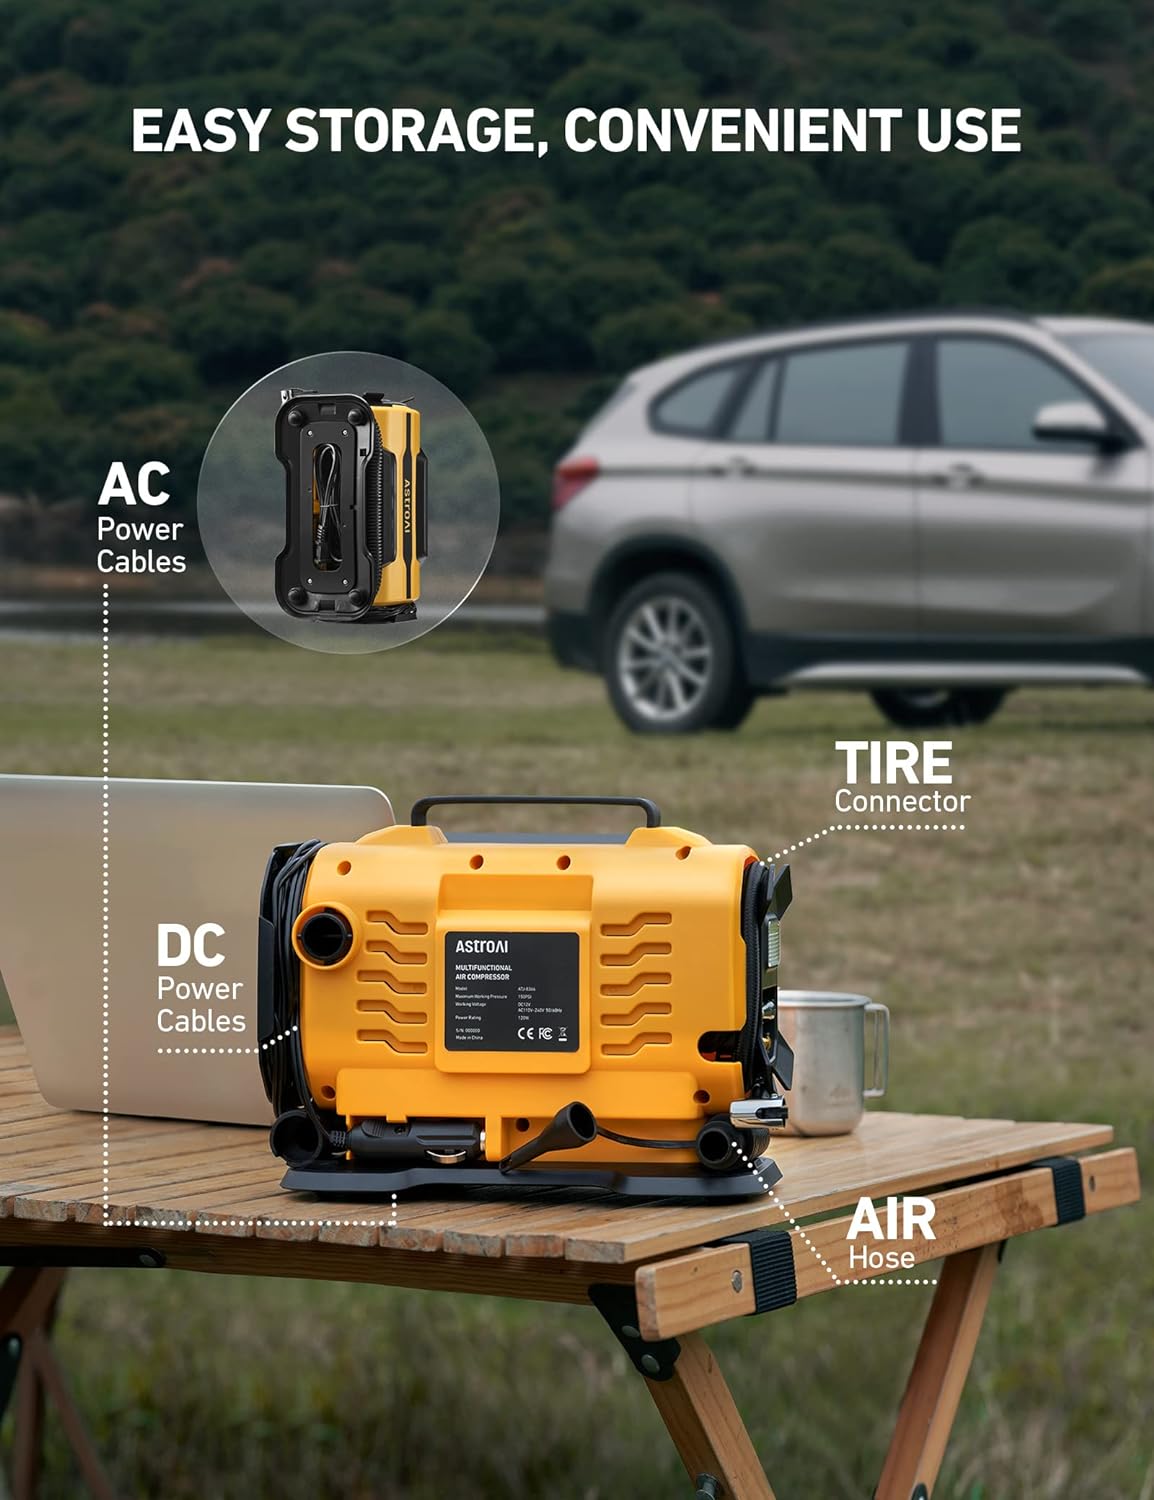 AstroAI Tire Inflator Portable Air Compressor for Car Tire Pump 150PSI 12V  DC/110V AC with Dual Metal Motors &LED Light，Automotive Car Accessories&Two  mode for car, bicycle tires and air mattresses.